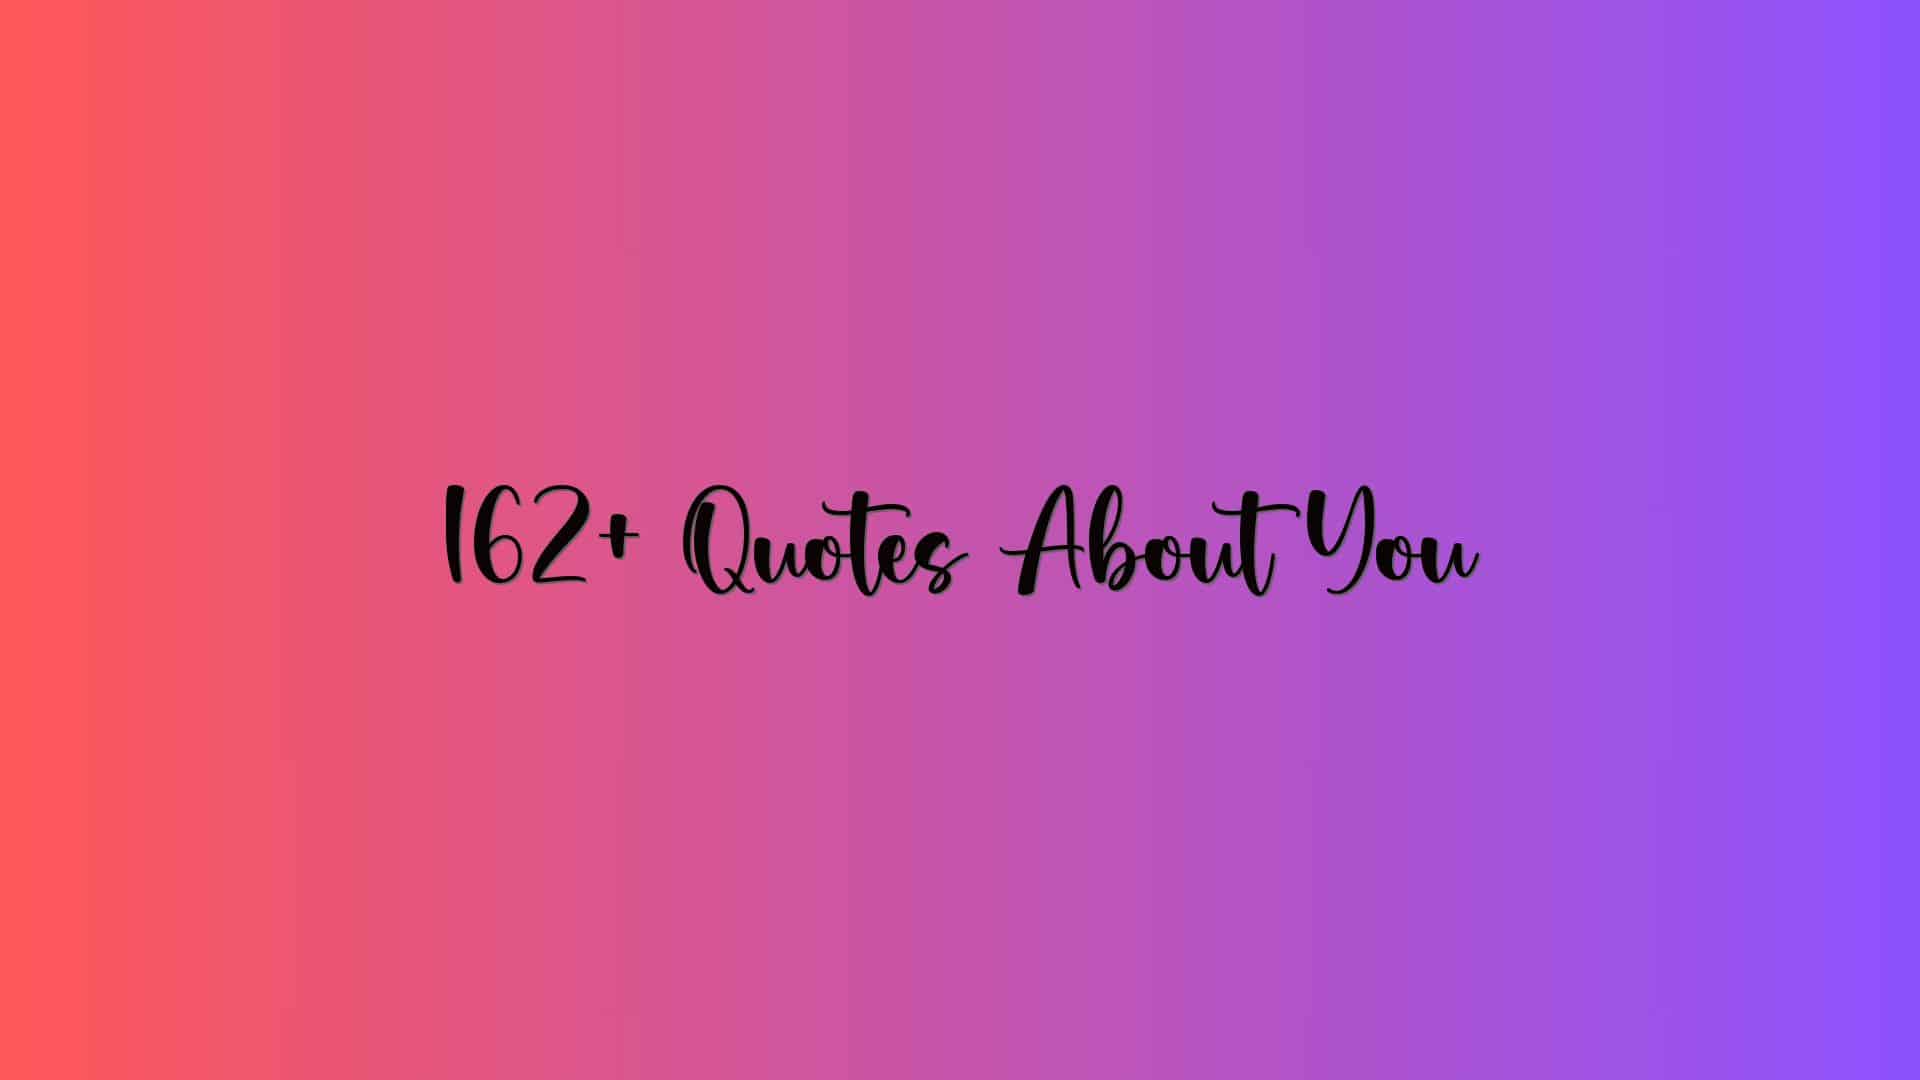 162+ Quotes About You